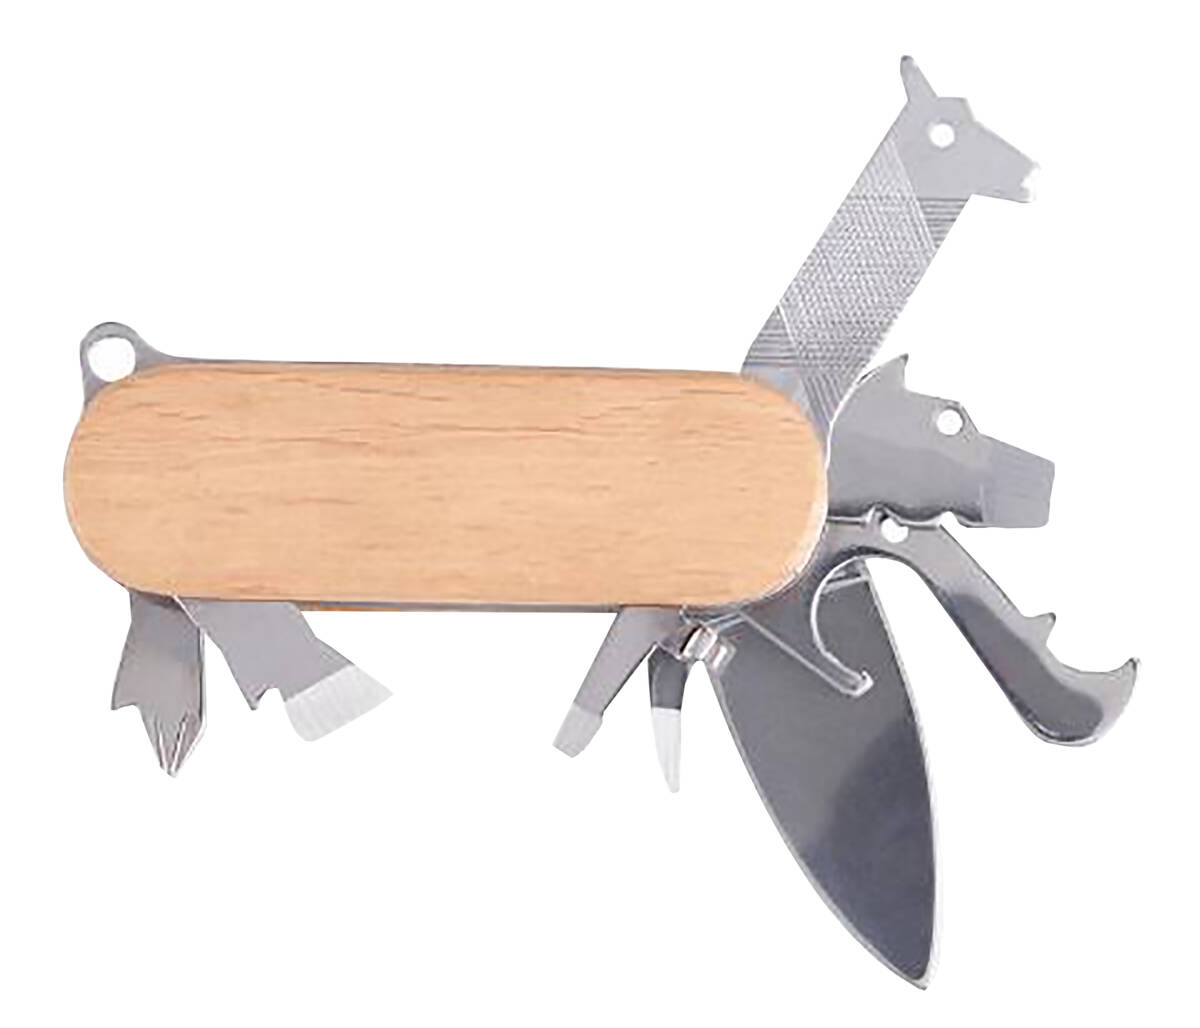 6. Animal Multi-Tool This adorable multi-tool includes a flat-head screwdriver, bottle opener, ...